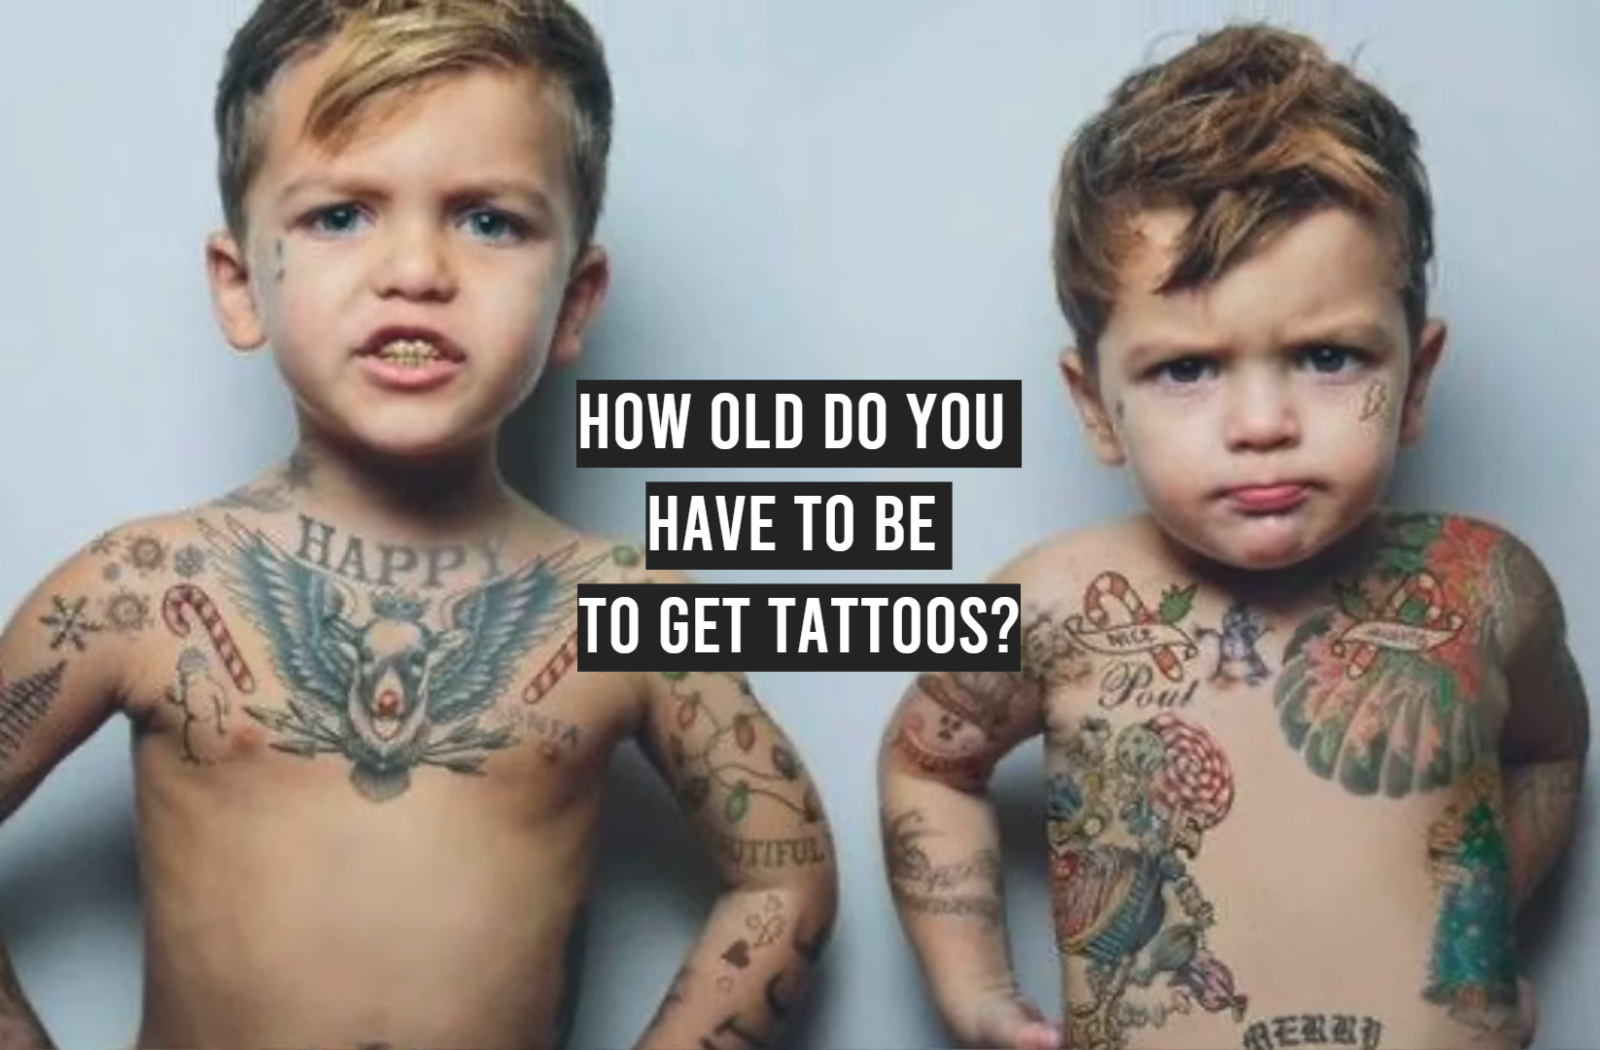 Legal age to get a tattoo in nj